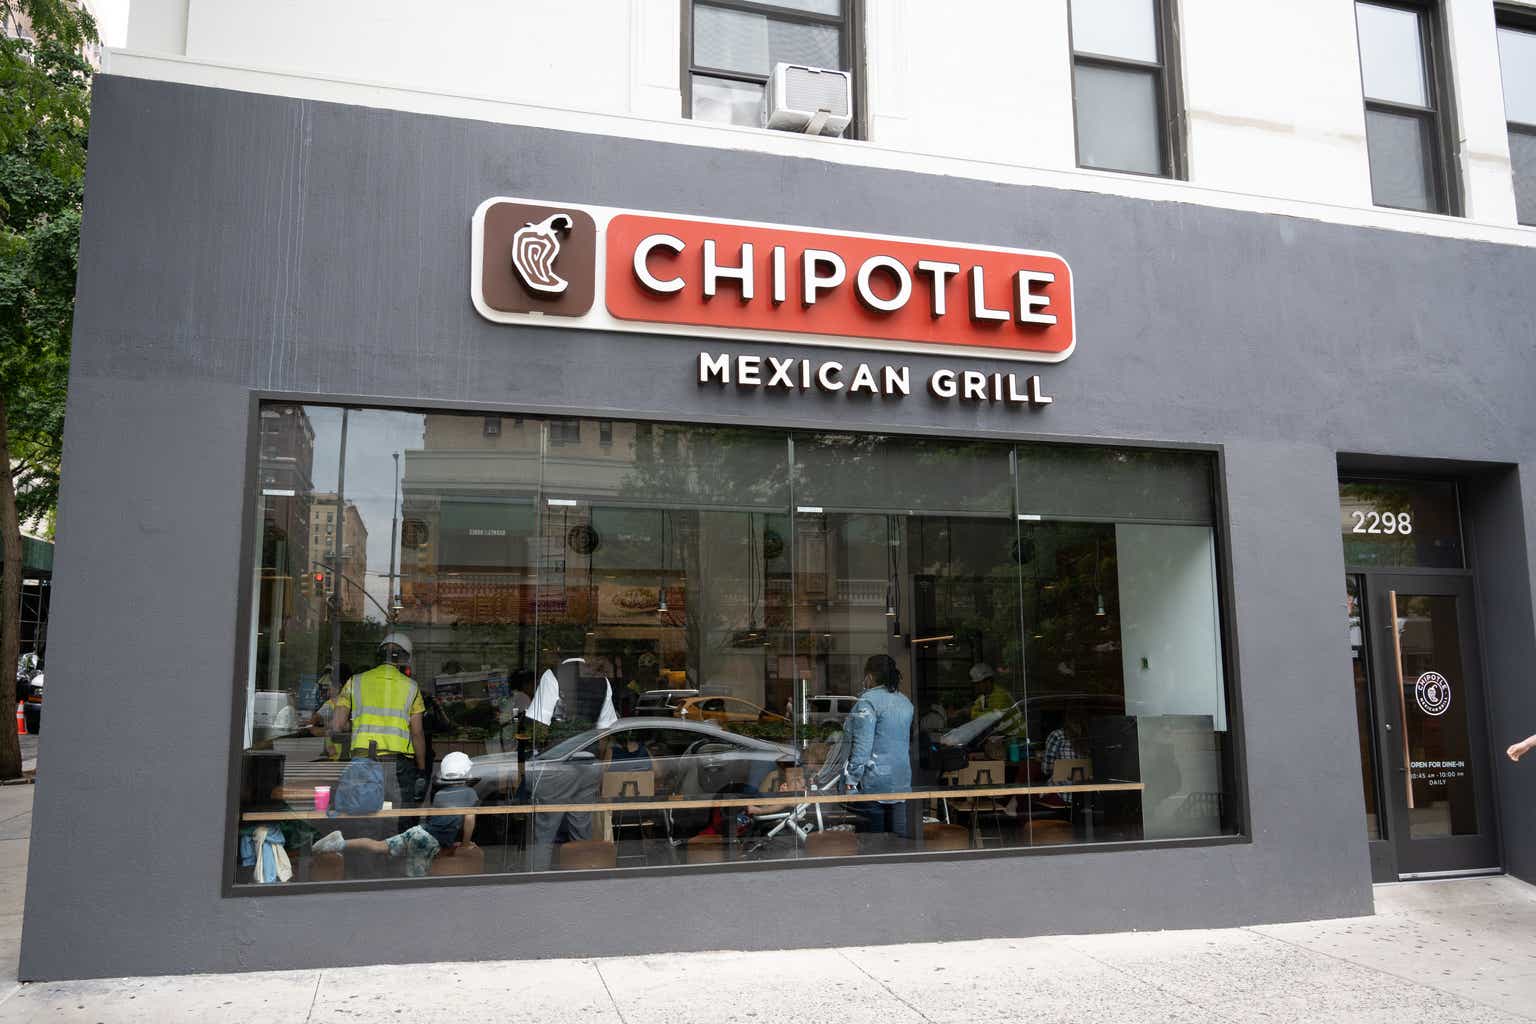 Chipotle: Overvalued From A Value Standpoint